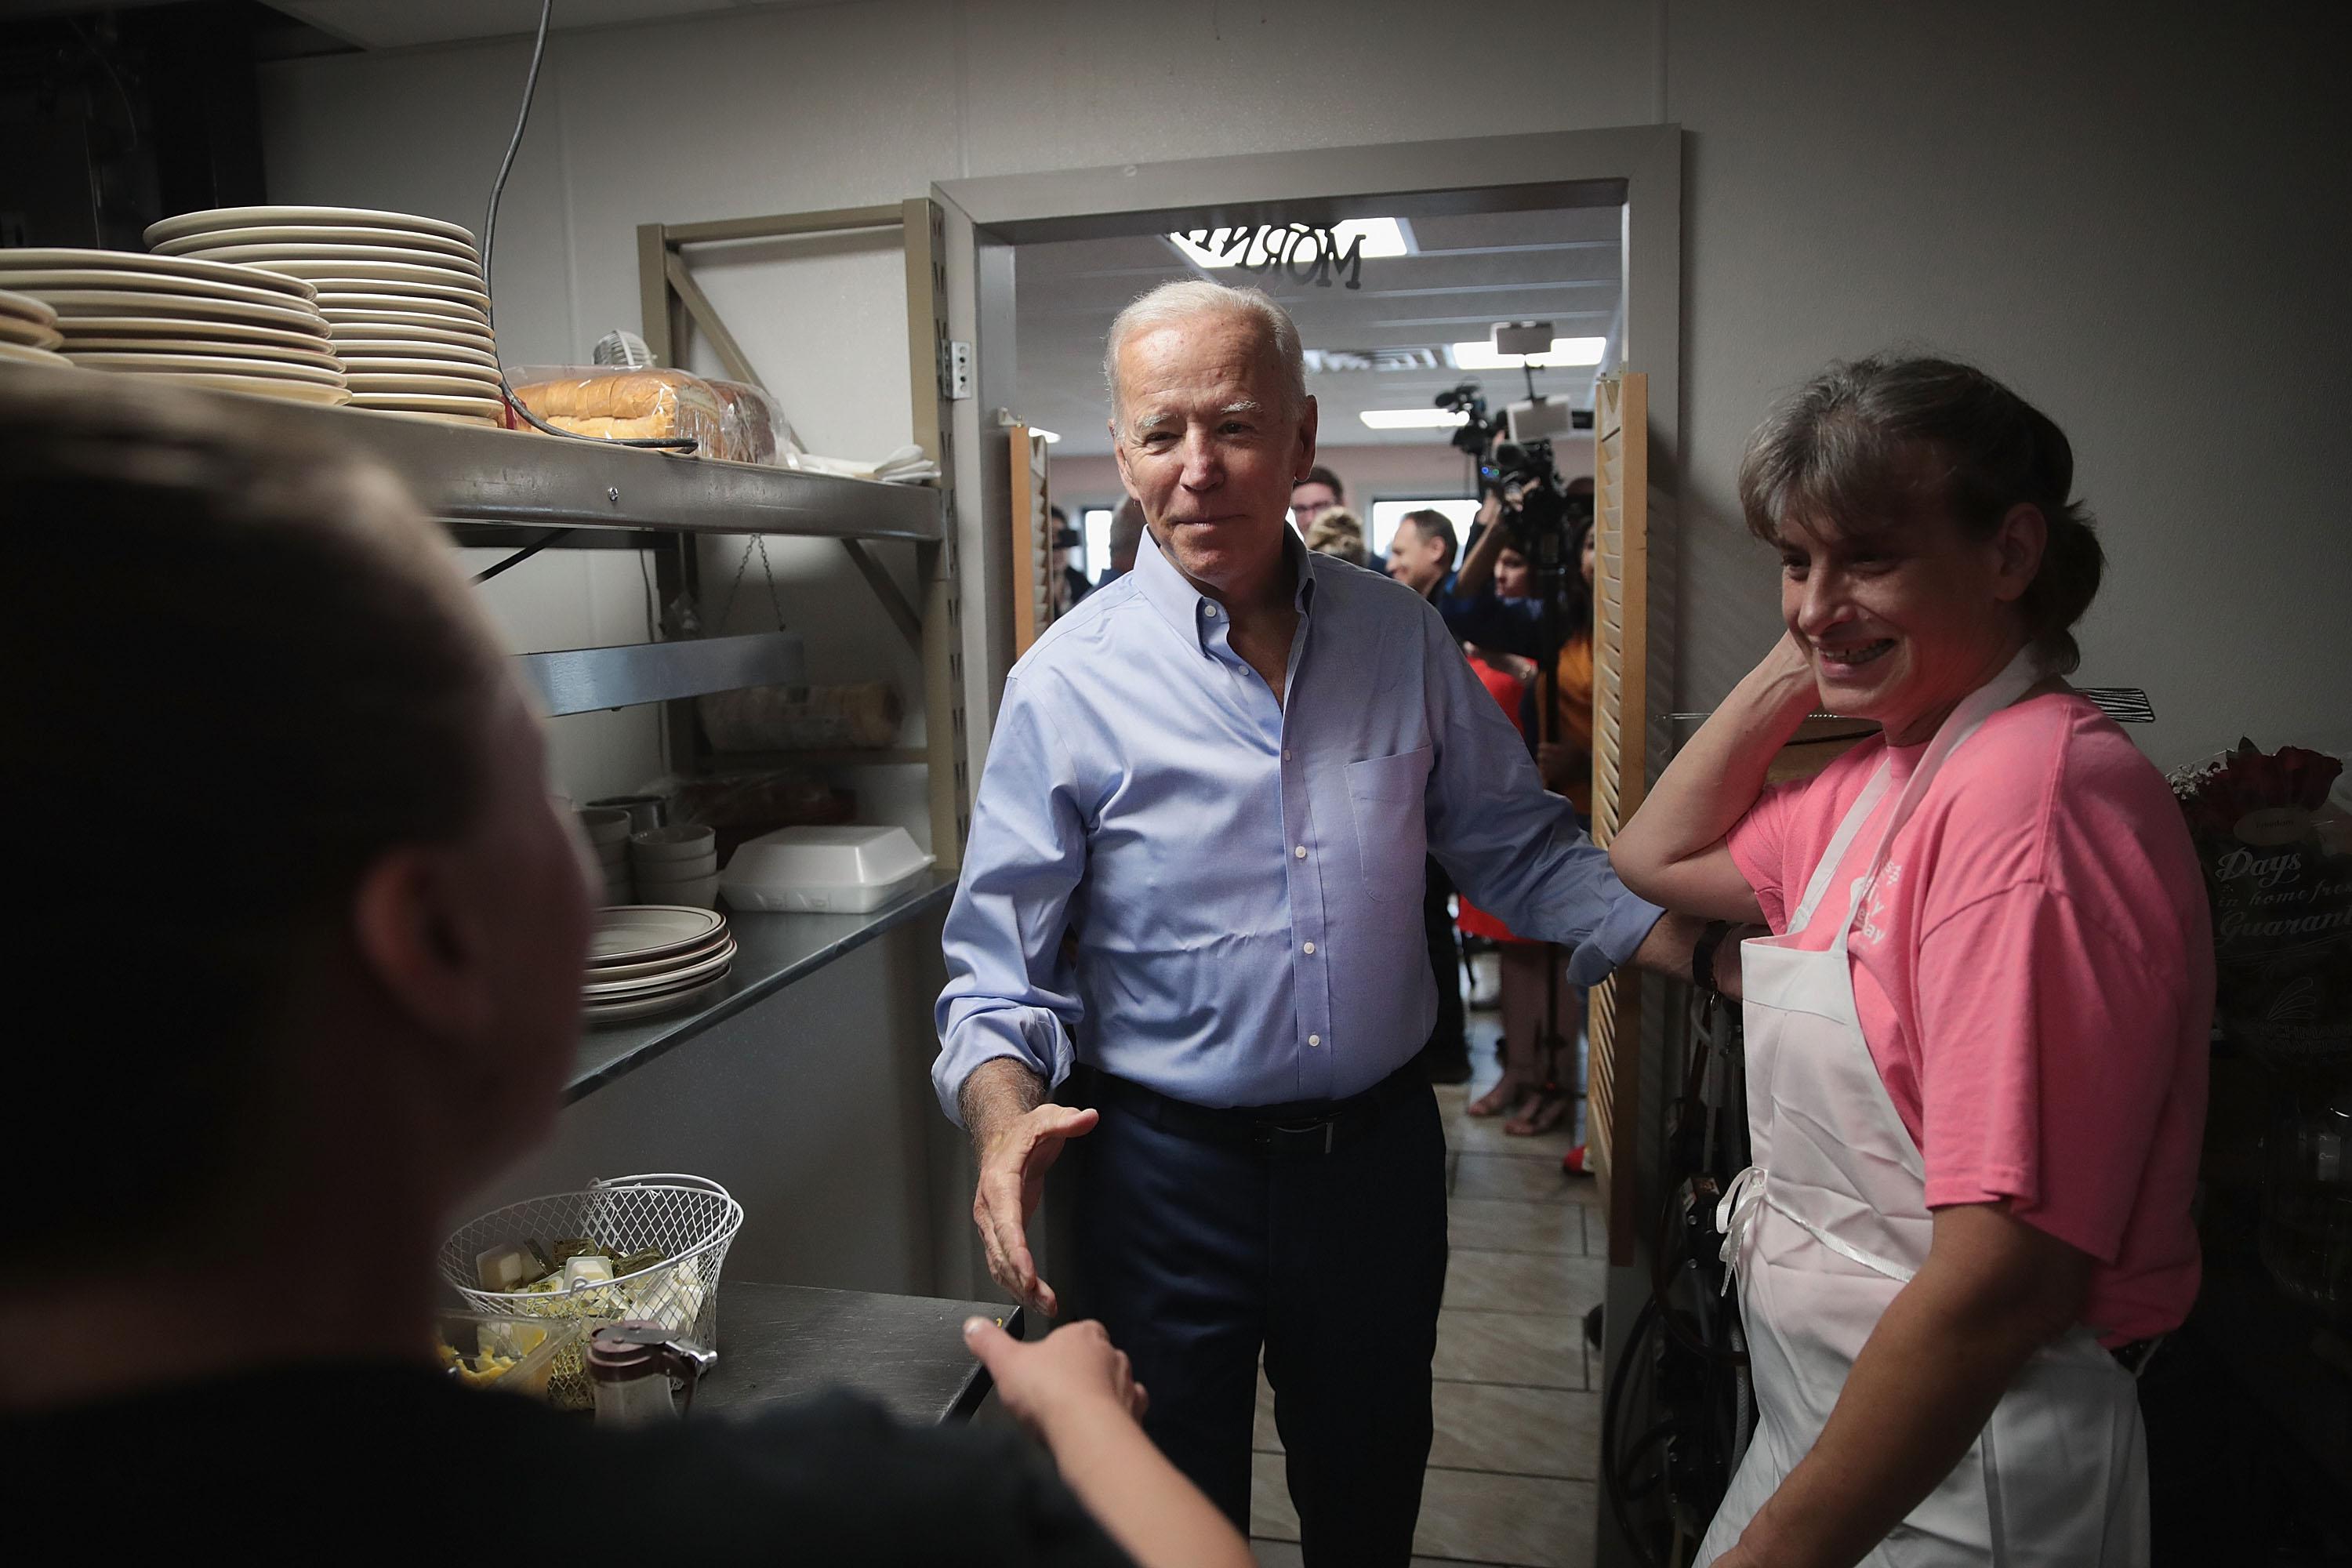 Democratic presidential candidate and former vice president Joe Biden greets the staff at the Tasty Cafe during a quick campaign stop at the restaurant on June 12, 2019 in Eldridge, Iowa.